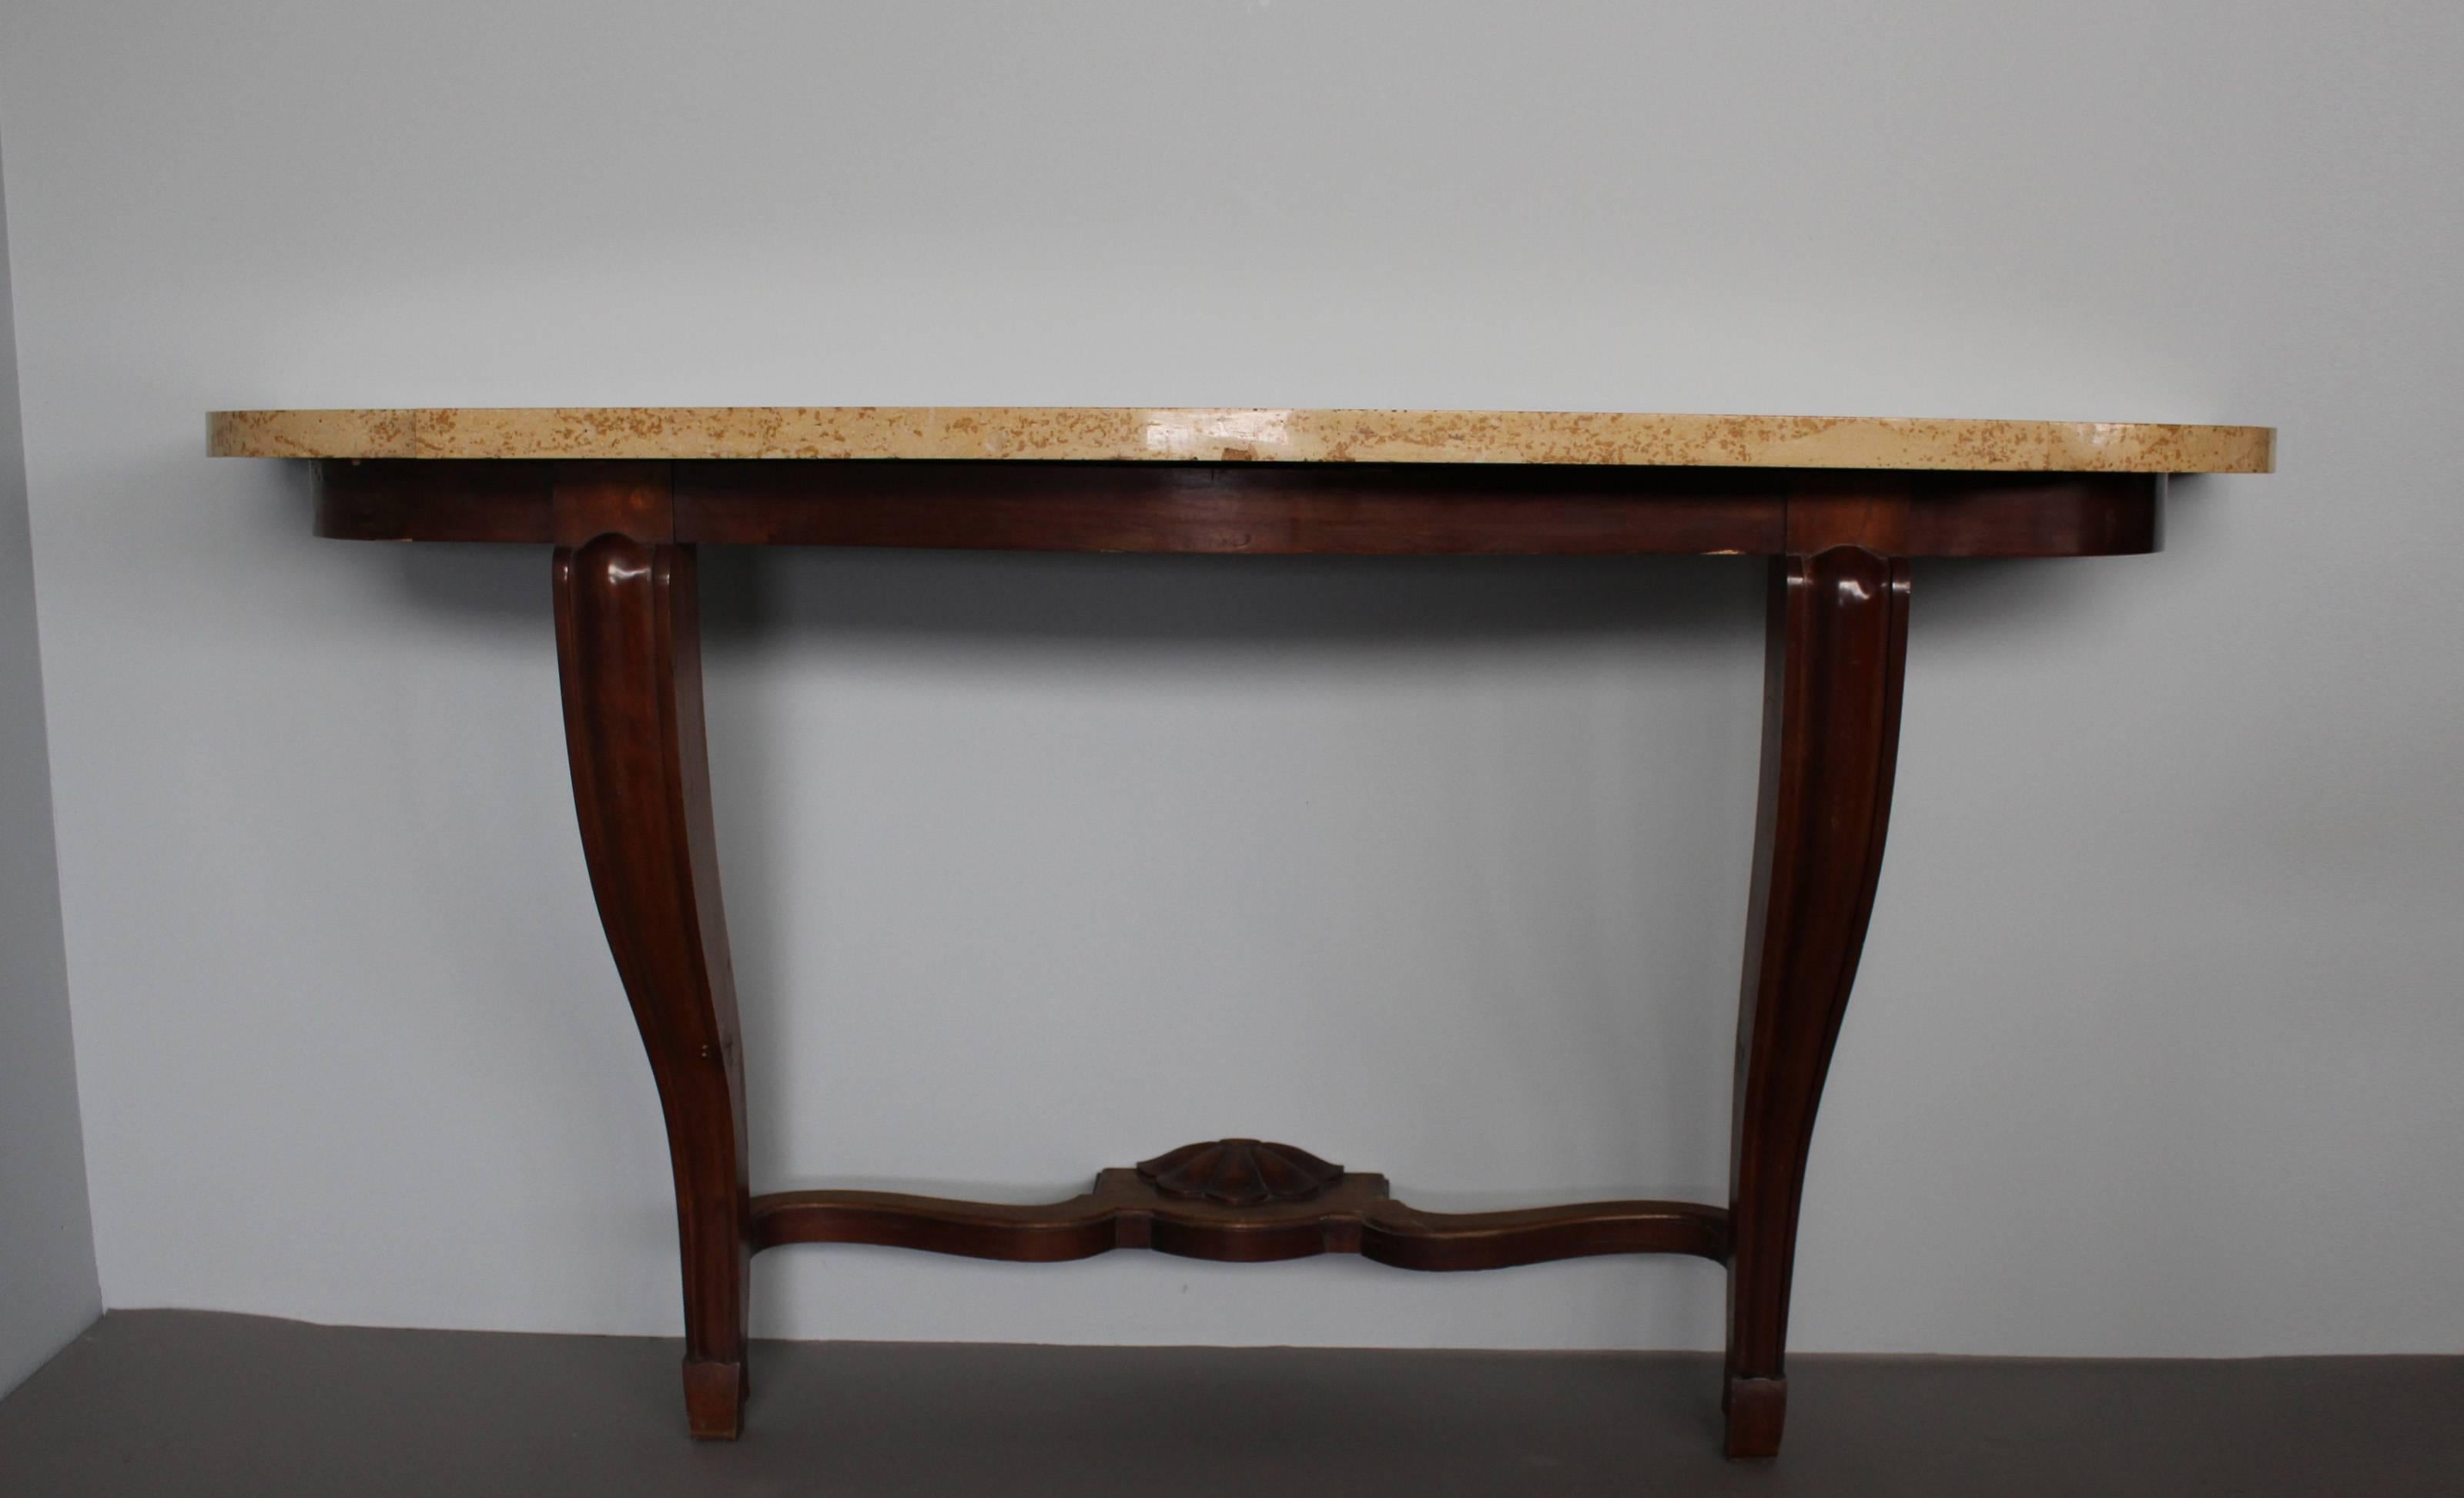 Fine French Art Deco mahogany console with a marble top in the manner of Arbus in a Neoclassical style.
A matching dining table and 12 chairs are also available - see pictures -